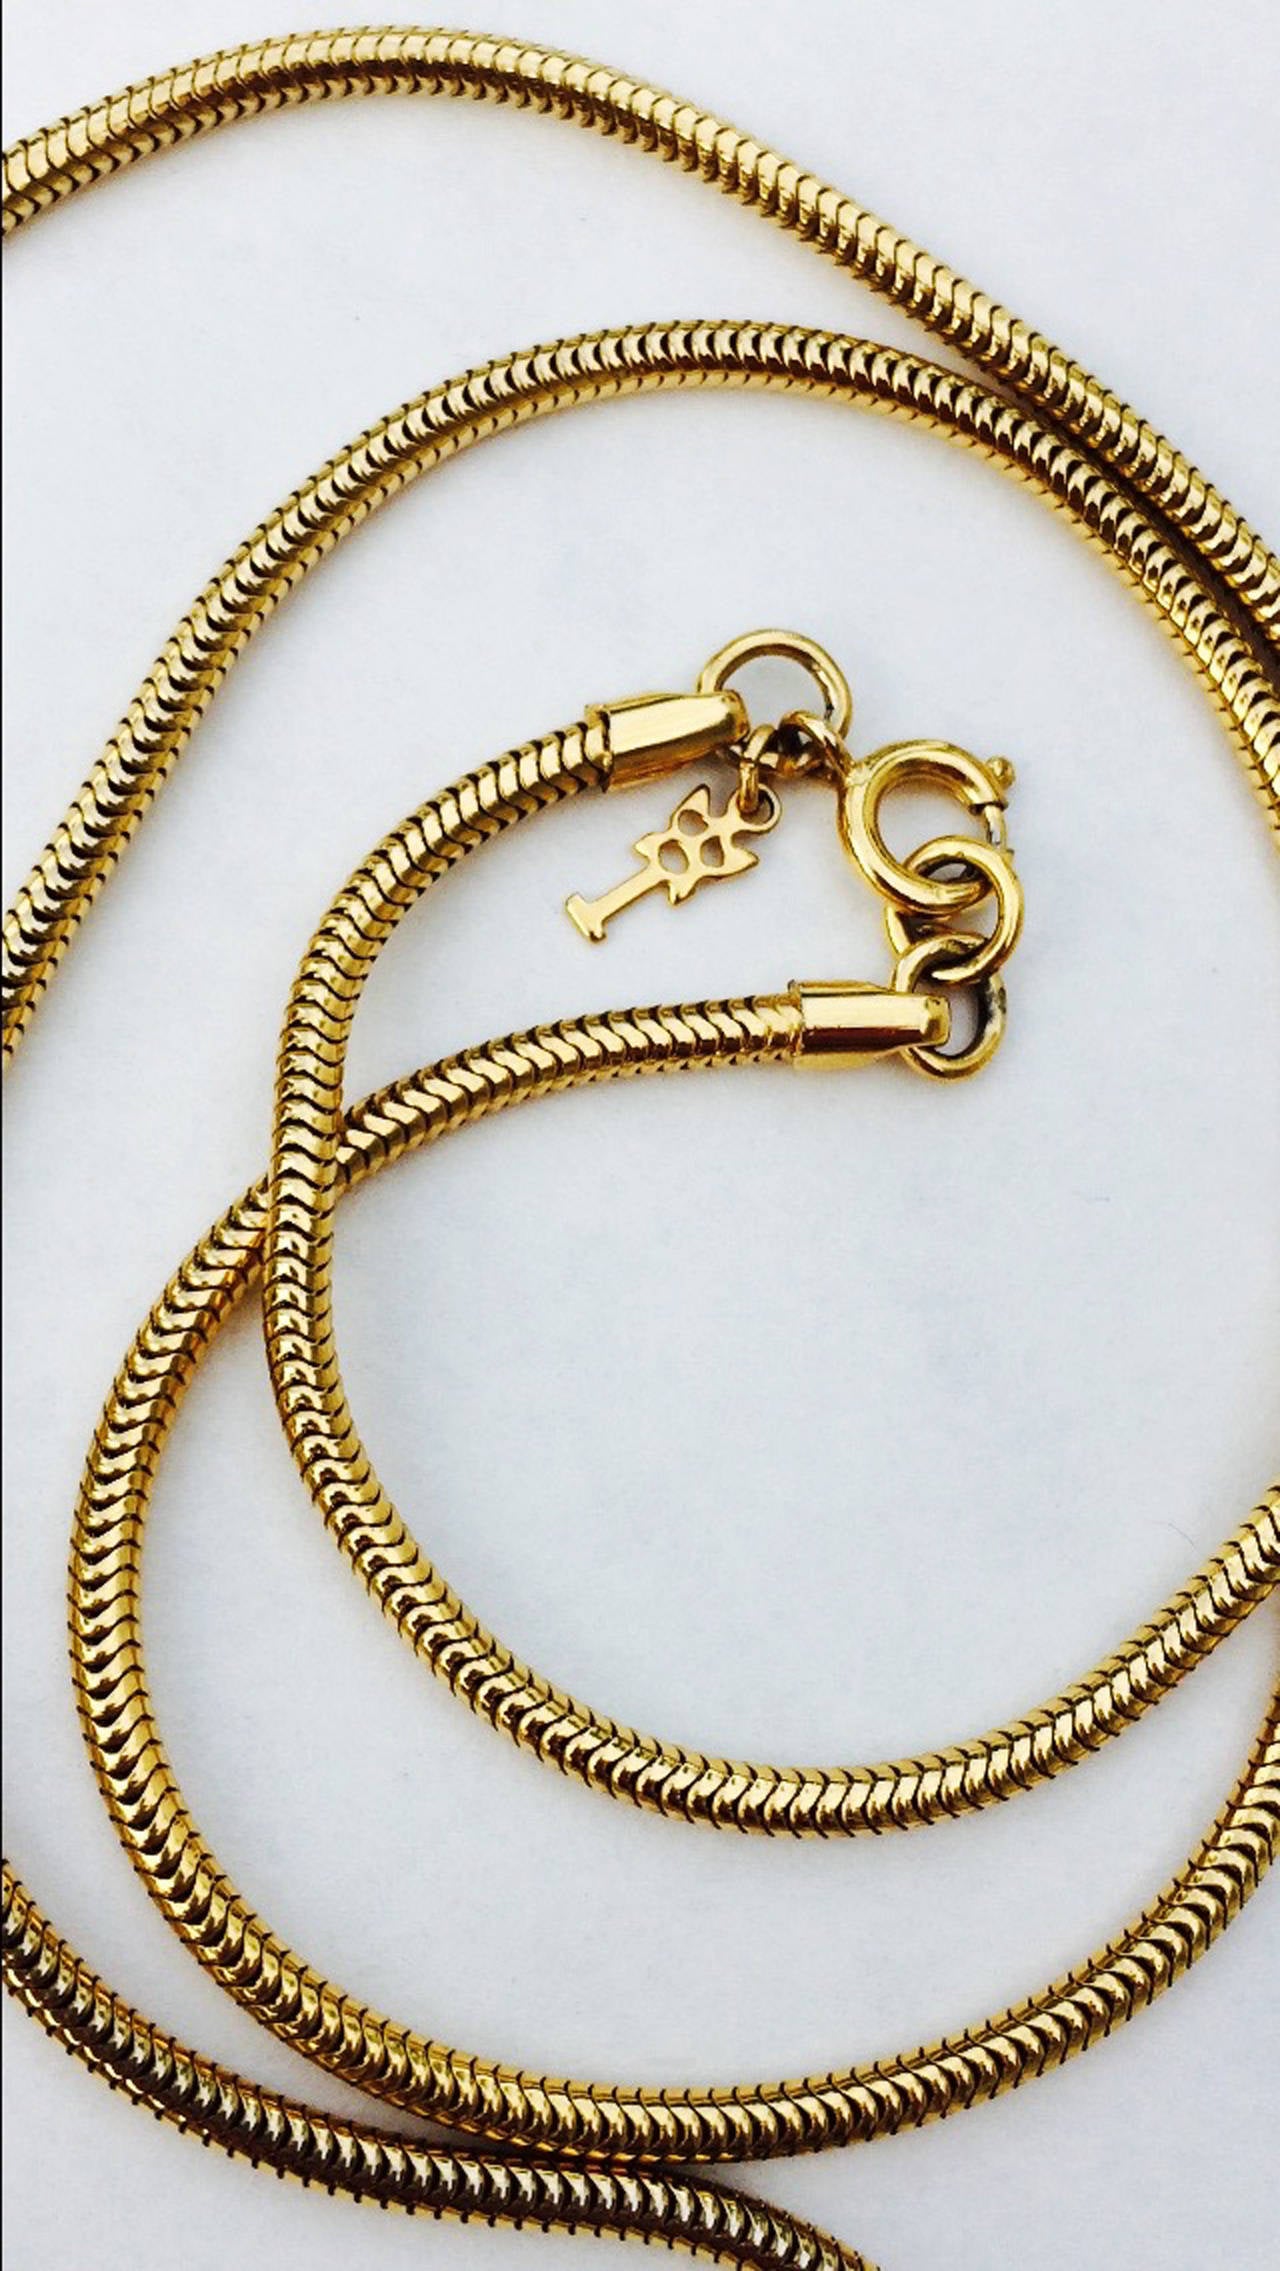 A fine vintage Trifari necklace in the American modernist style. Signed gilt snake link chain suspends a sculpted white enamel metal panel with a additional gilt metal overlay. Original locking ring closure intact. Excellent possibly unworn.